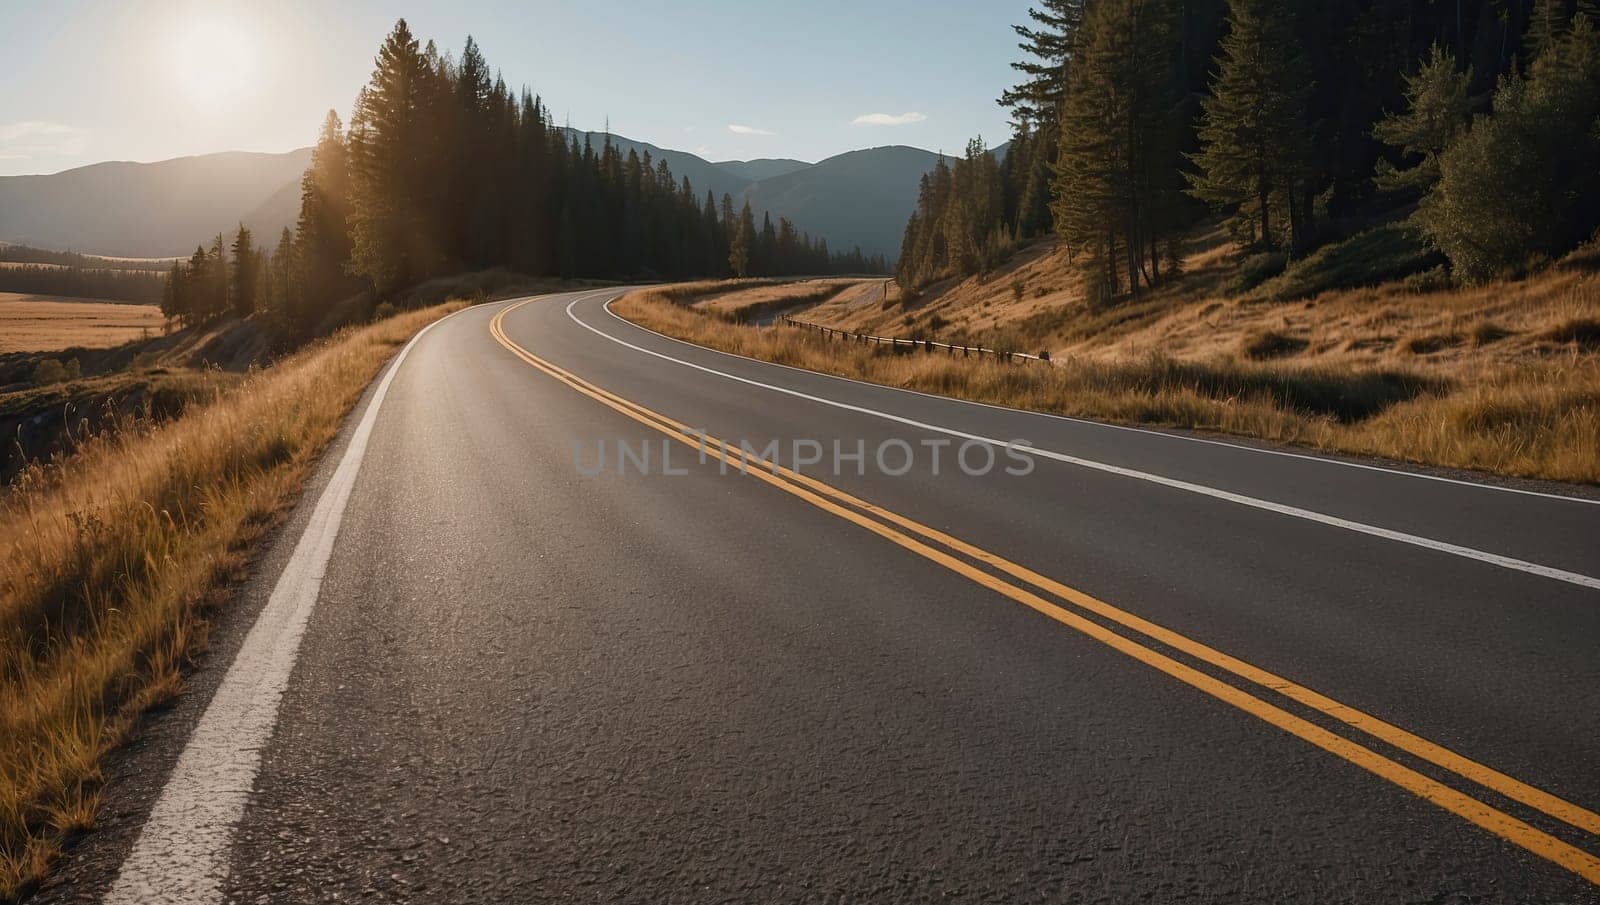 Road in nature at sunrise by applesstock